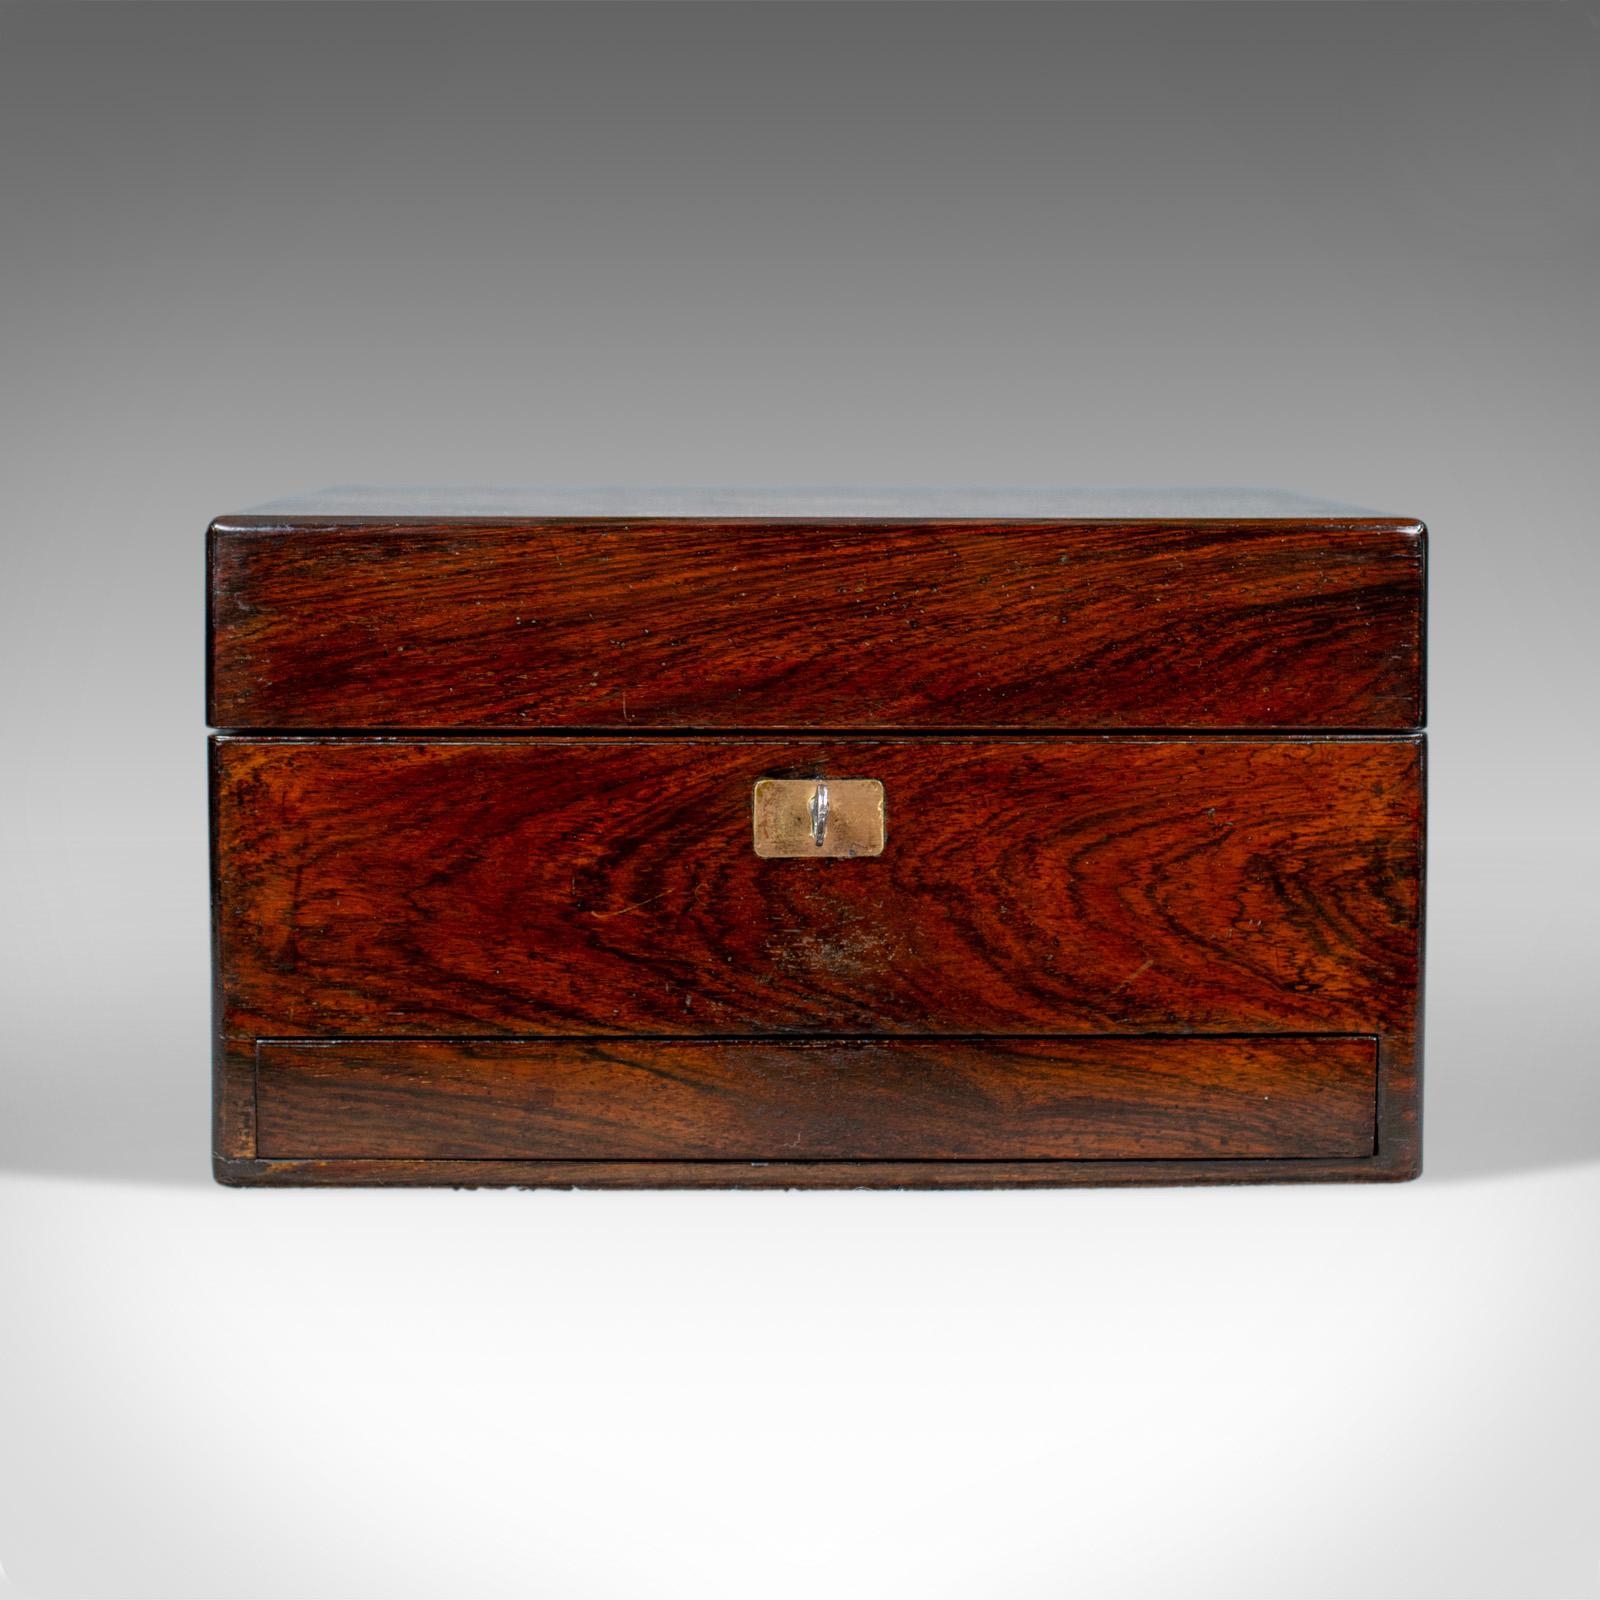 This is an antique vanity box. An English, Victorian travelling vanity case in rosewood and dating to the mid 19th century, circa 1850.

Of fine quality in a sumptuous rosewood case
Grain interest and a desirable aged patina
Good, consistent